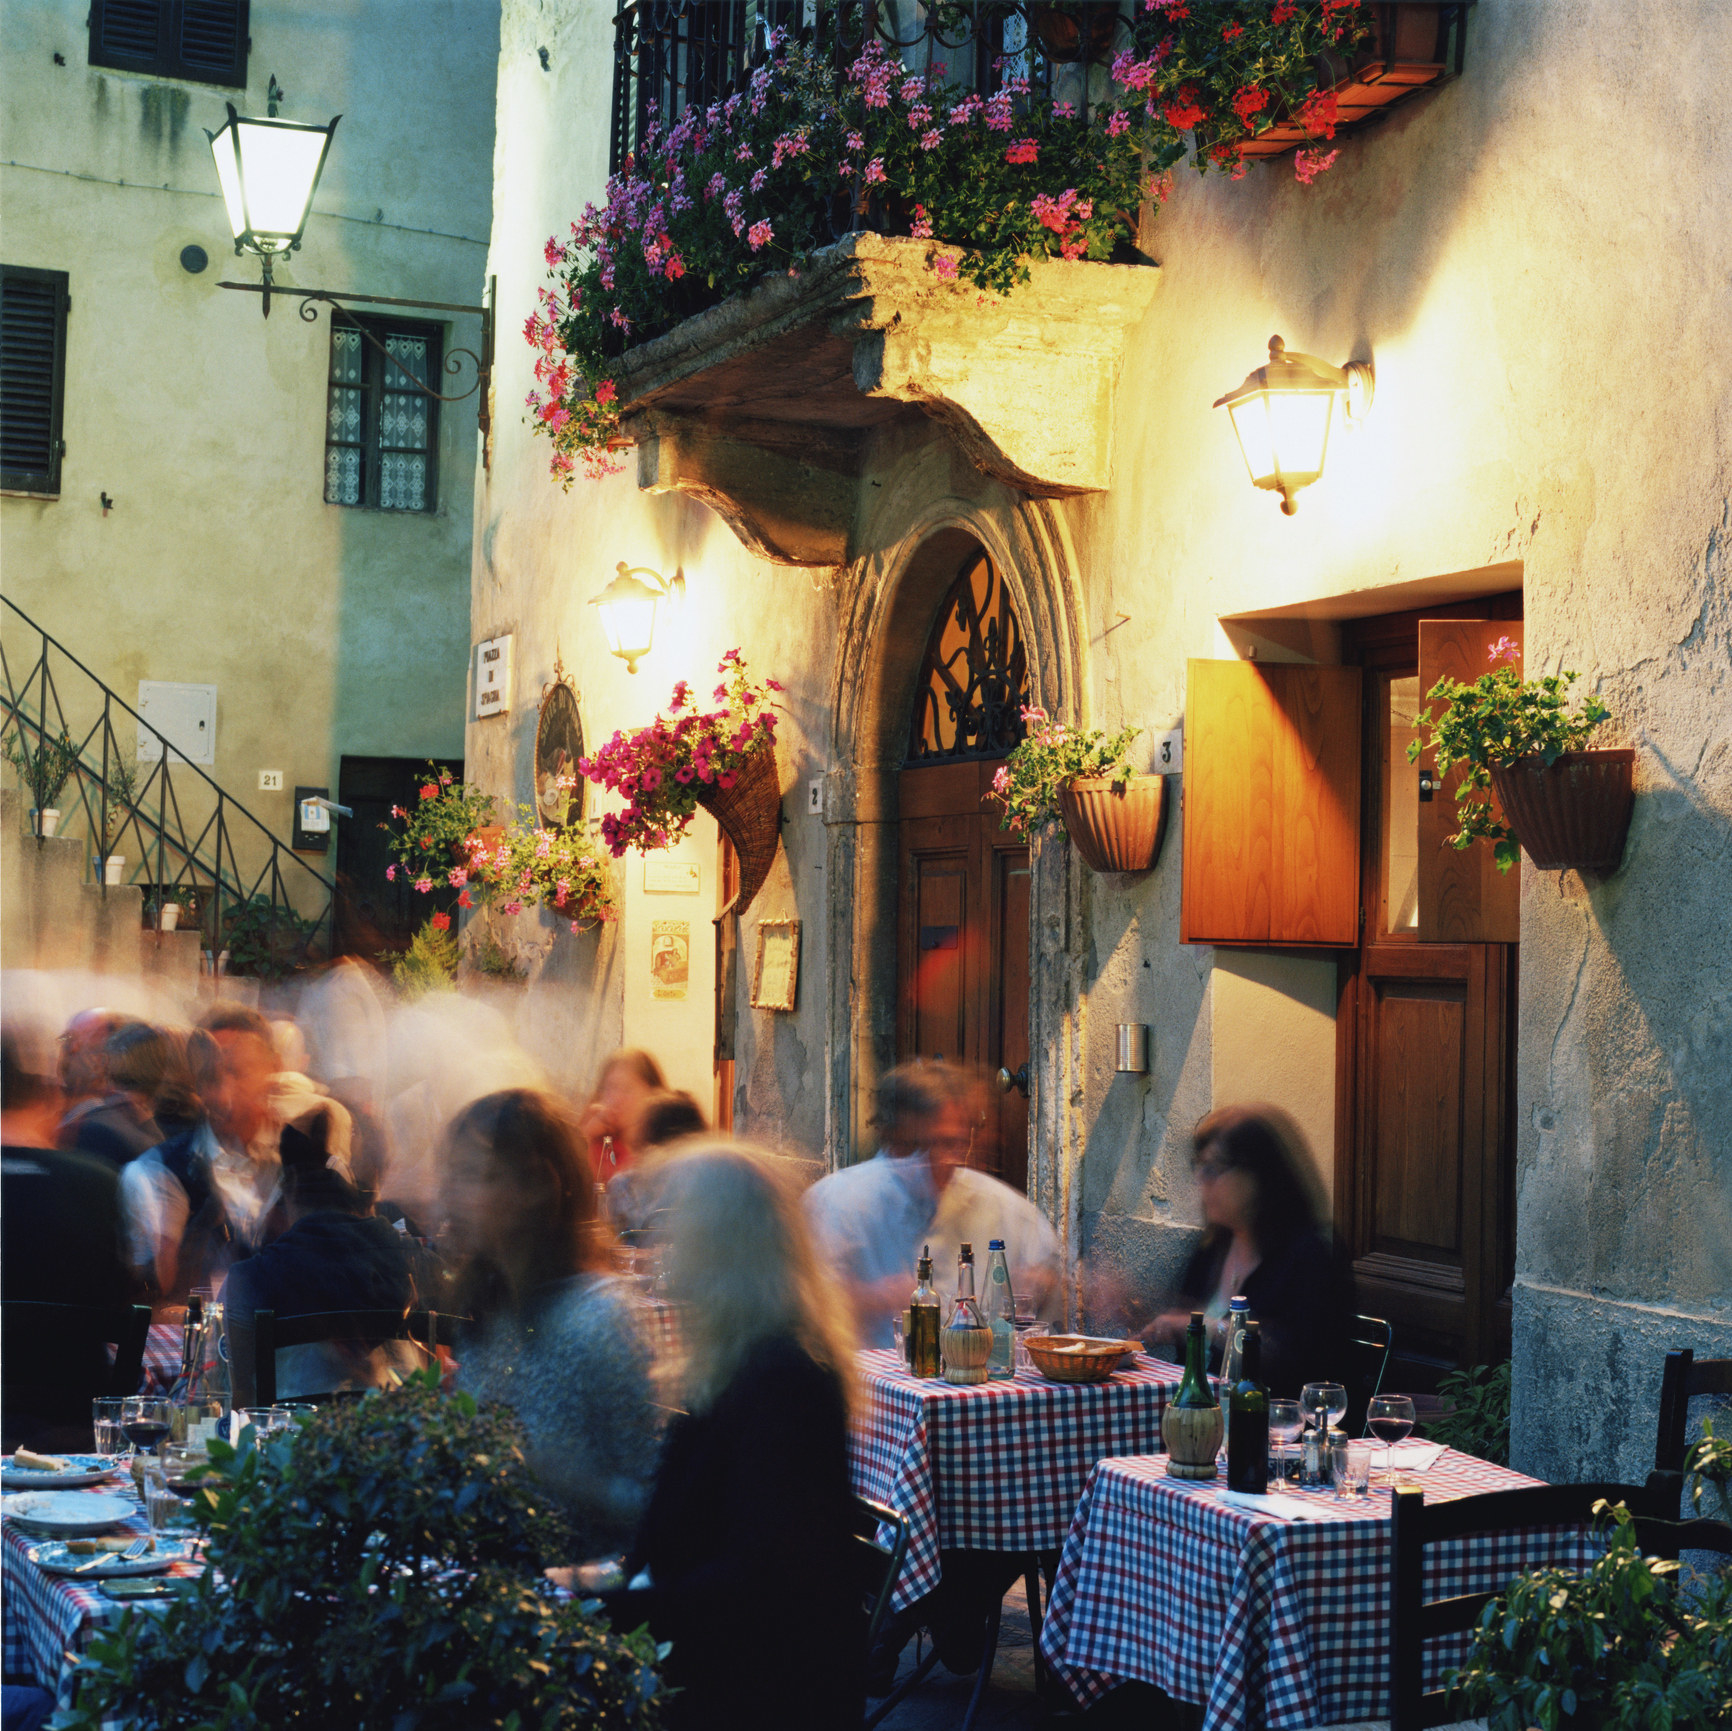 People dining outside at a quaint restaurant.